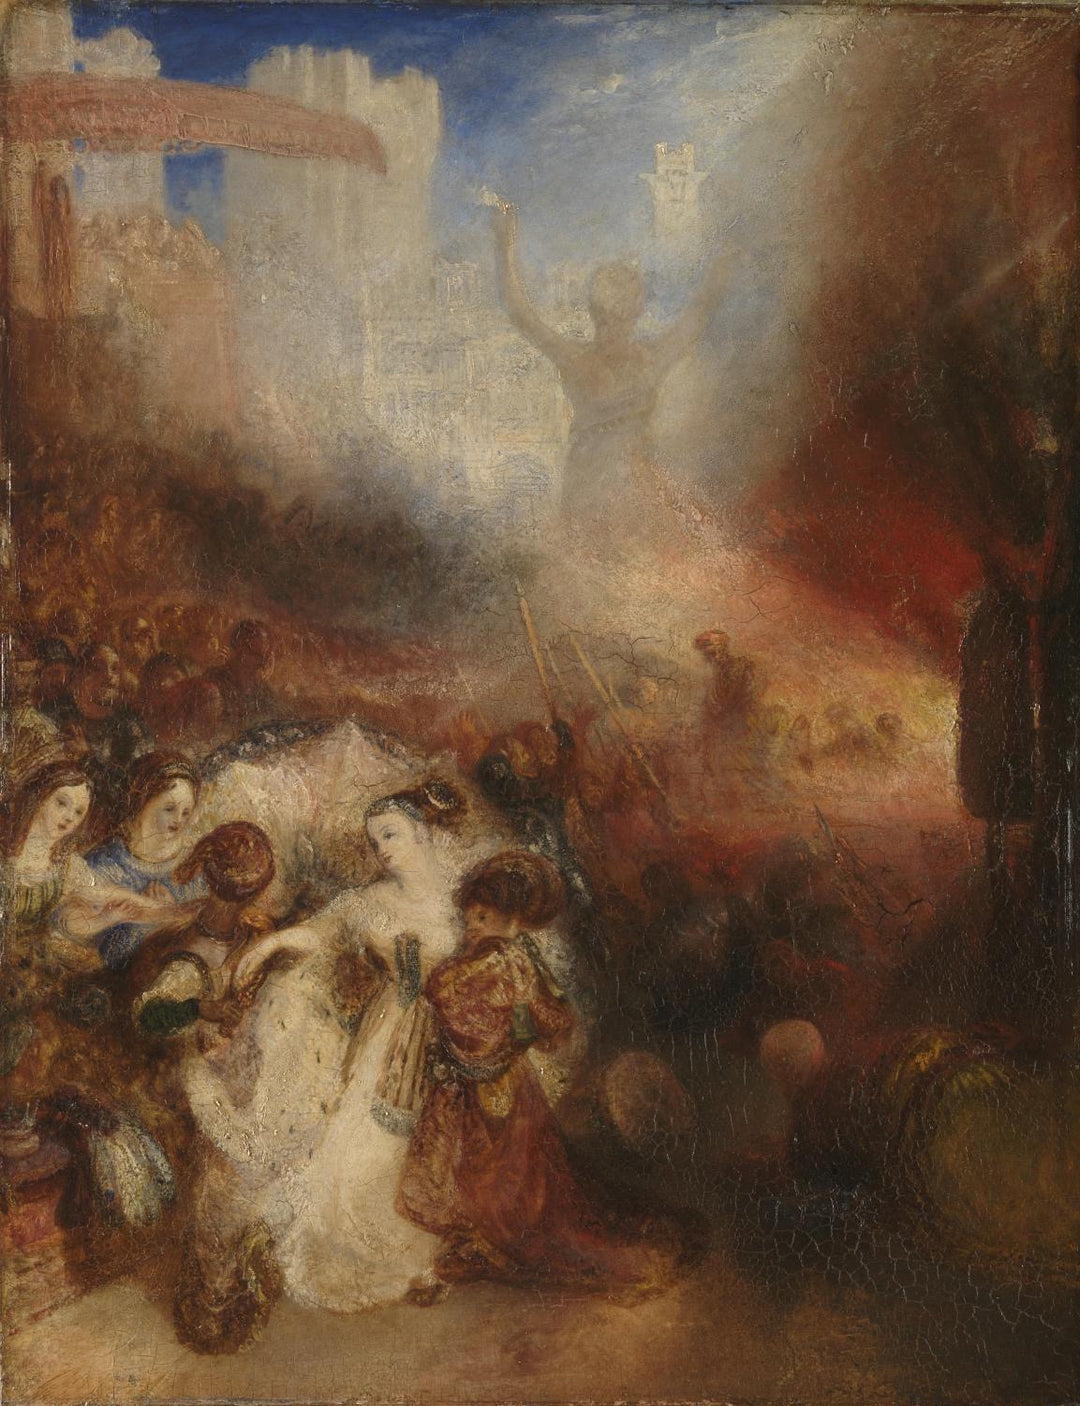 Shadrach, Meshach and Abednego in the Burning Fiery Furnace by J. M. W. Turner. Seascape painting, Turner artworks, Turner canvas art, J. M. W. Turner oil painting, Turner reproduction for sale. Landscape paintings, Turner art decor, Turner oil painting on canvas, Blue Surf Art